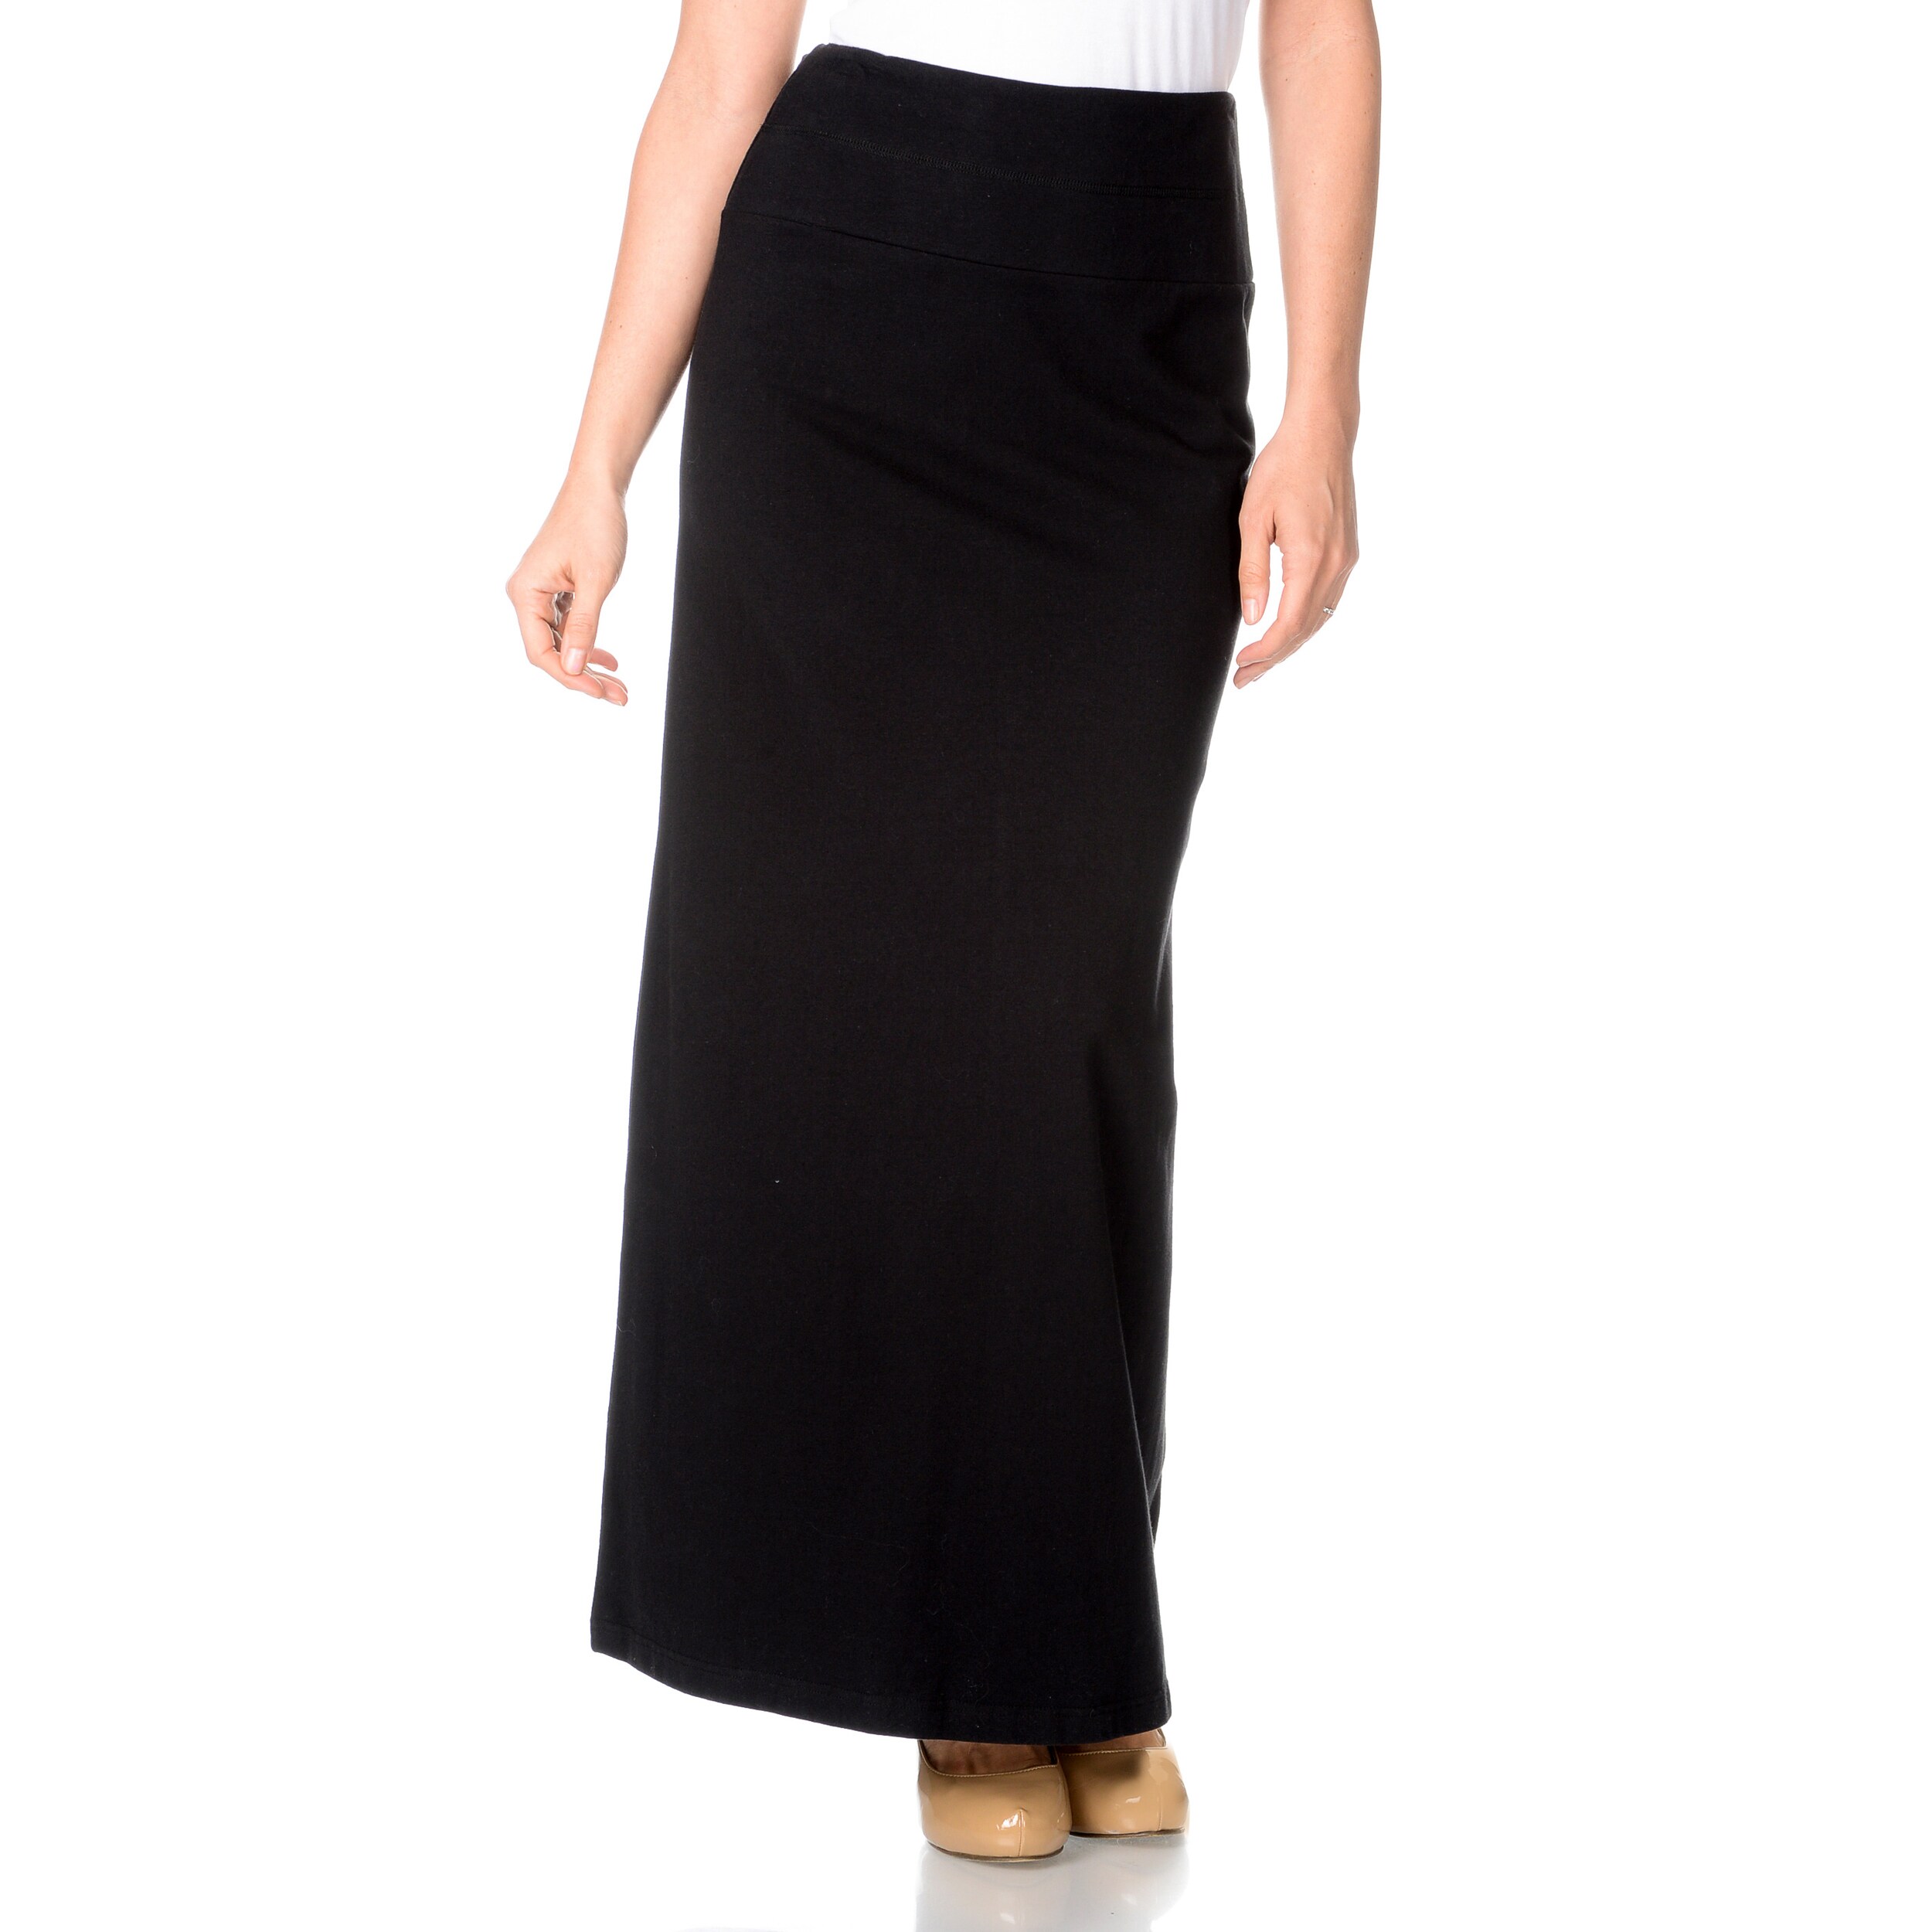 https://ak1.ostkcdn.com/images/products/9752728/TEEZ-HER-Womens-Instant-Smooth-and-Slim-Stretch-Jersey-Full-Length-Maxi-Skirt-with-Hidden-Smoothing-Panel-162185de-ca6f-4599-b888-08e0cd034bfb.jpg